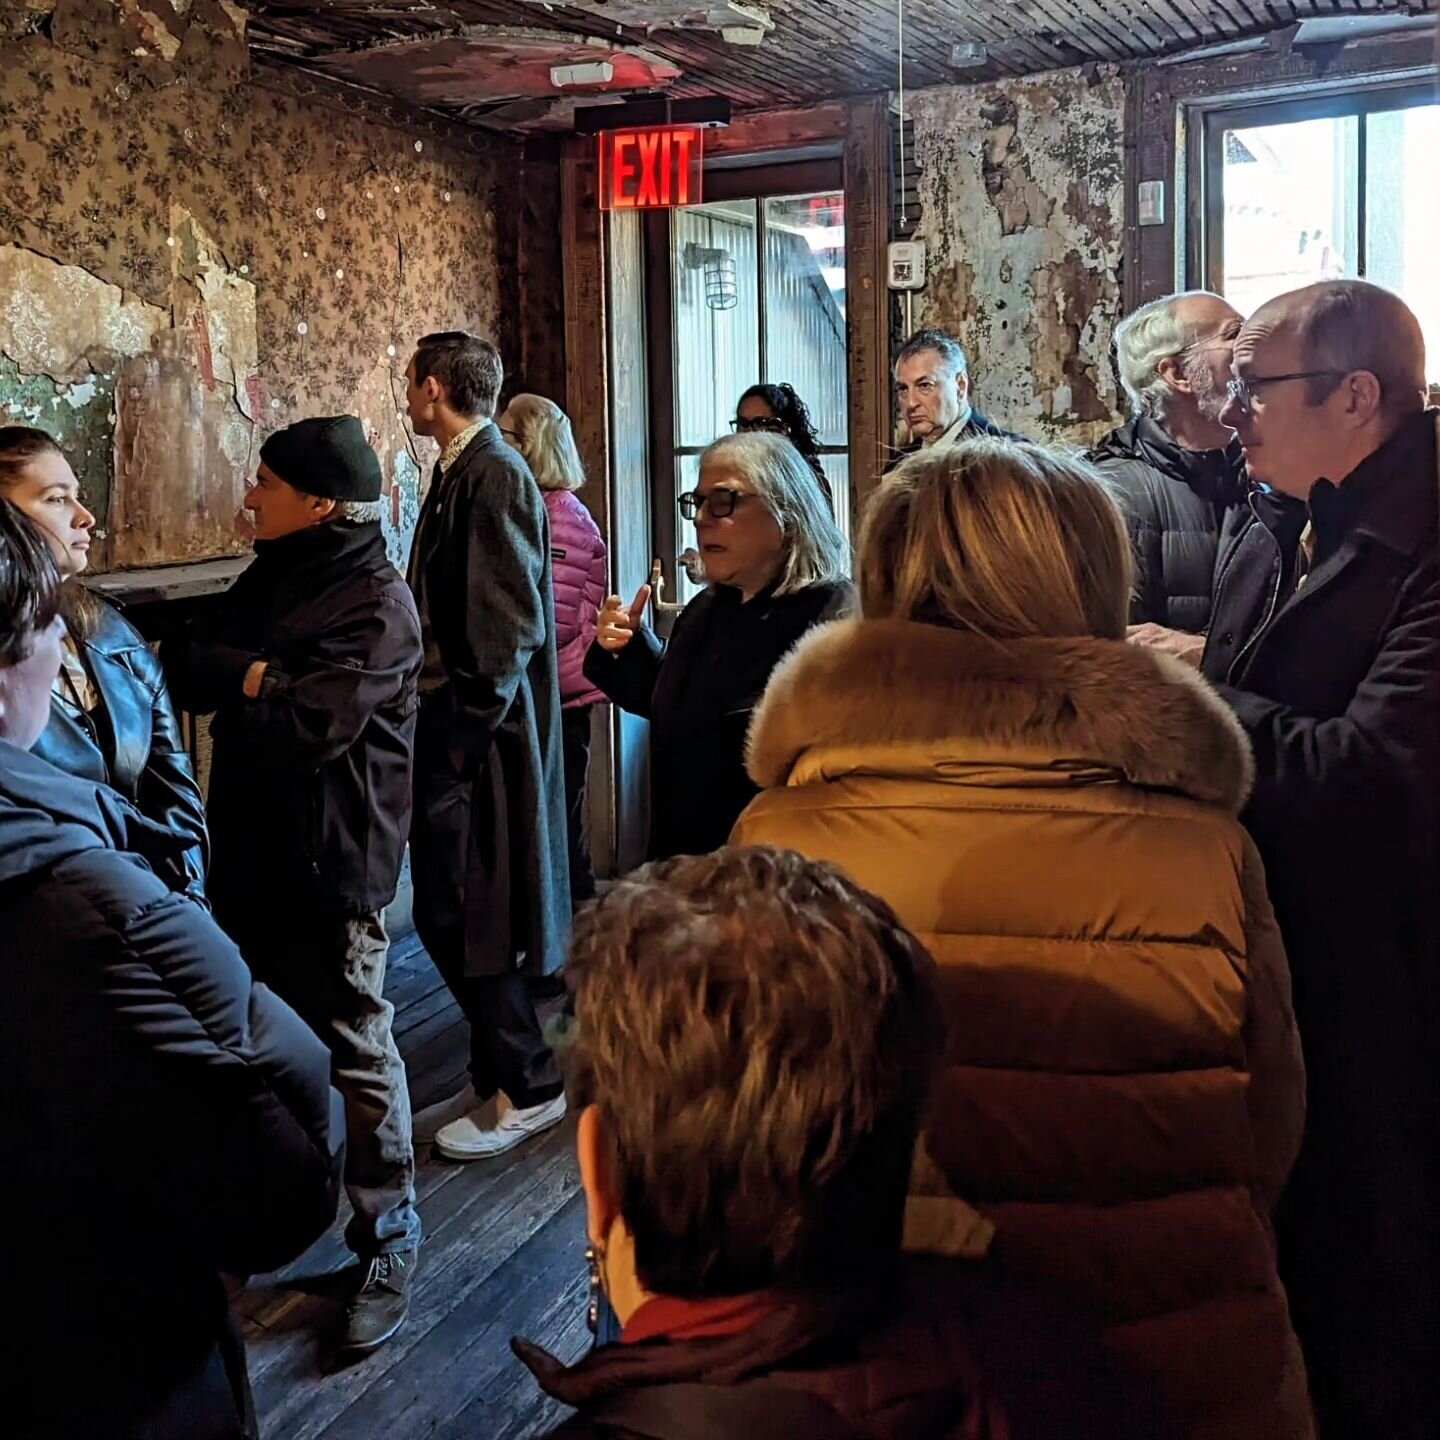 The New York Landmarks Conservancy Professional Circle Tour at the Tenement Museum was packed and a success! Swipe left to see the video at the very end, where we were able to capture Stephanie Hoagland explaining &quot;why and how&quot; conservation